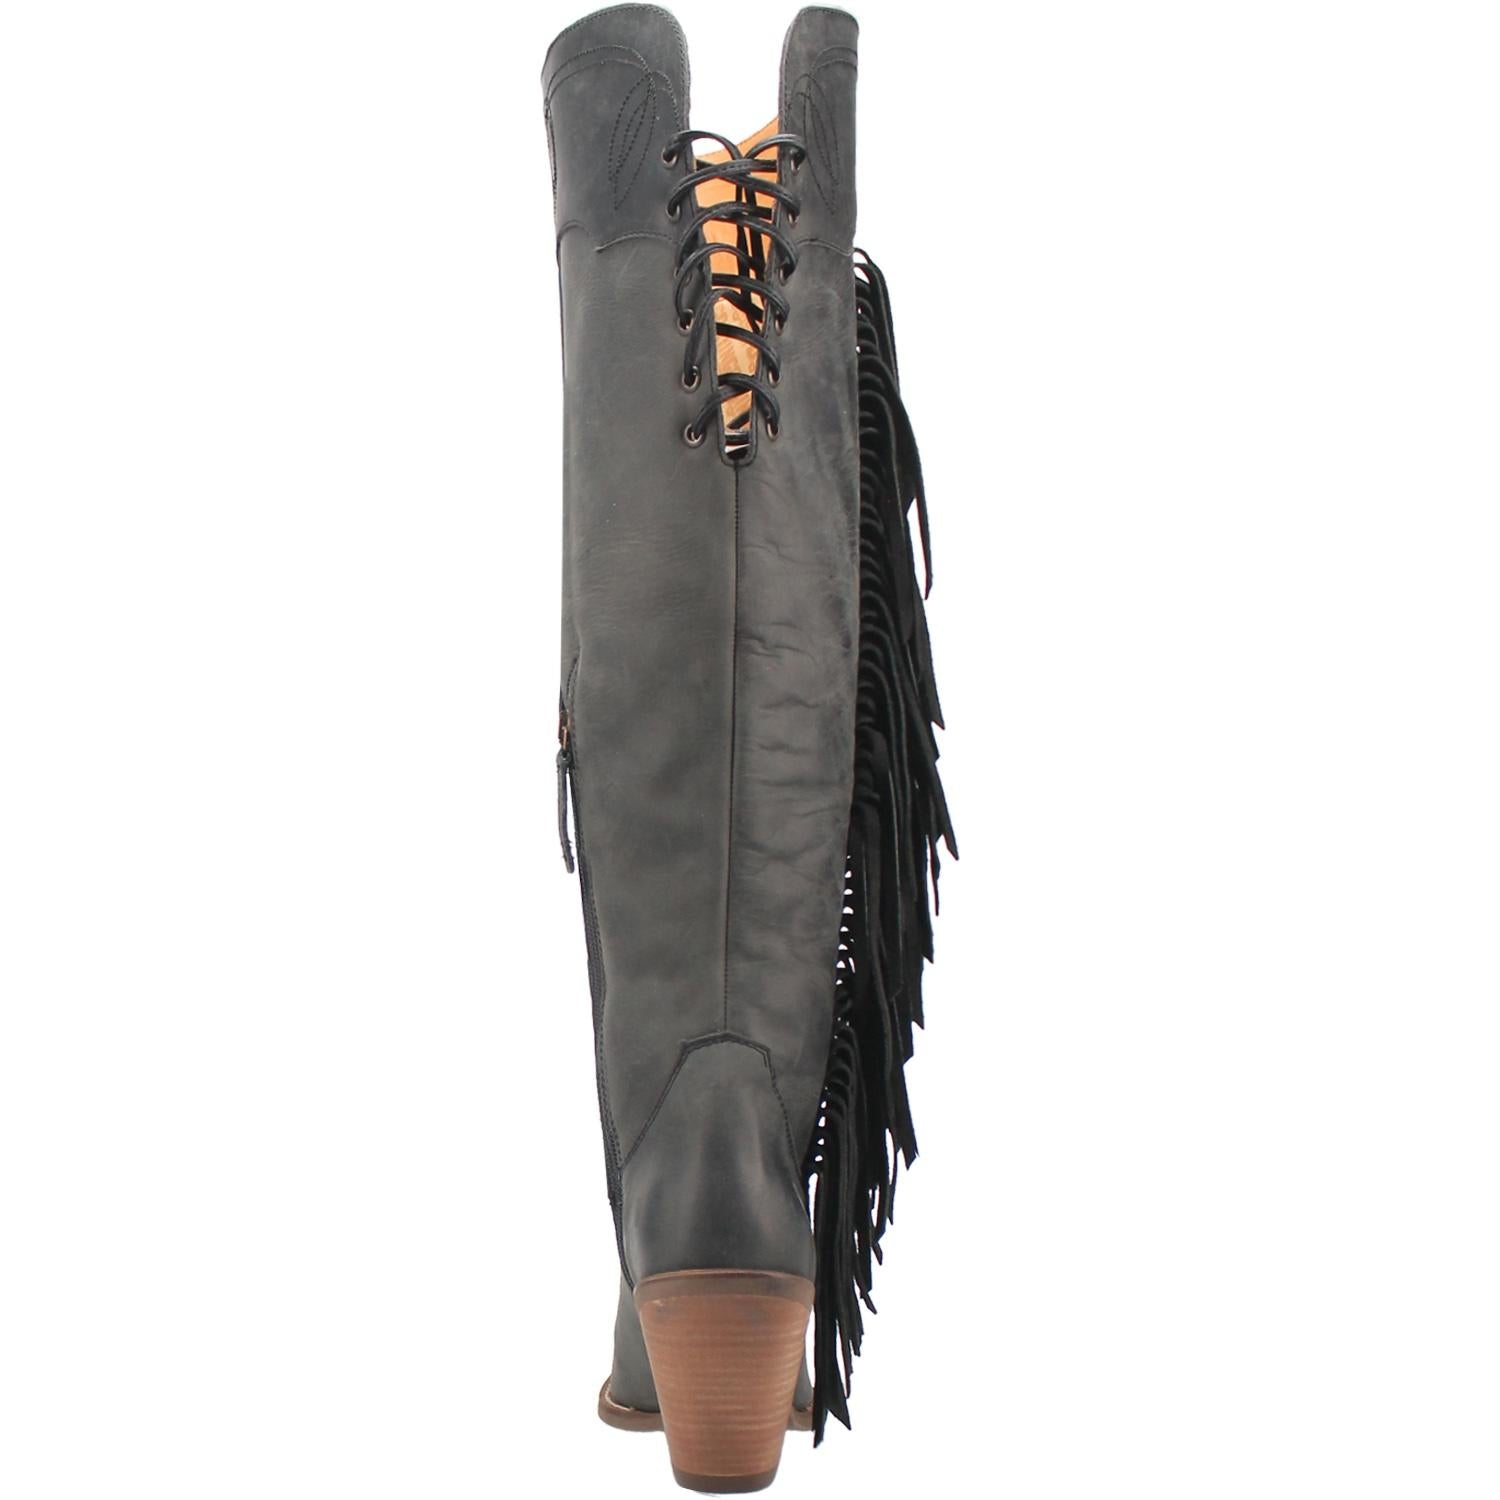 A tall black leather boot with a short heel, stitched desings at the top and bottom, lace up back, fringe down the right side, and a half zipper. Item is pictured on a plain white background